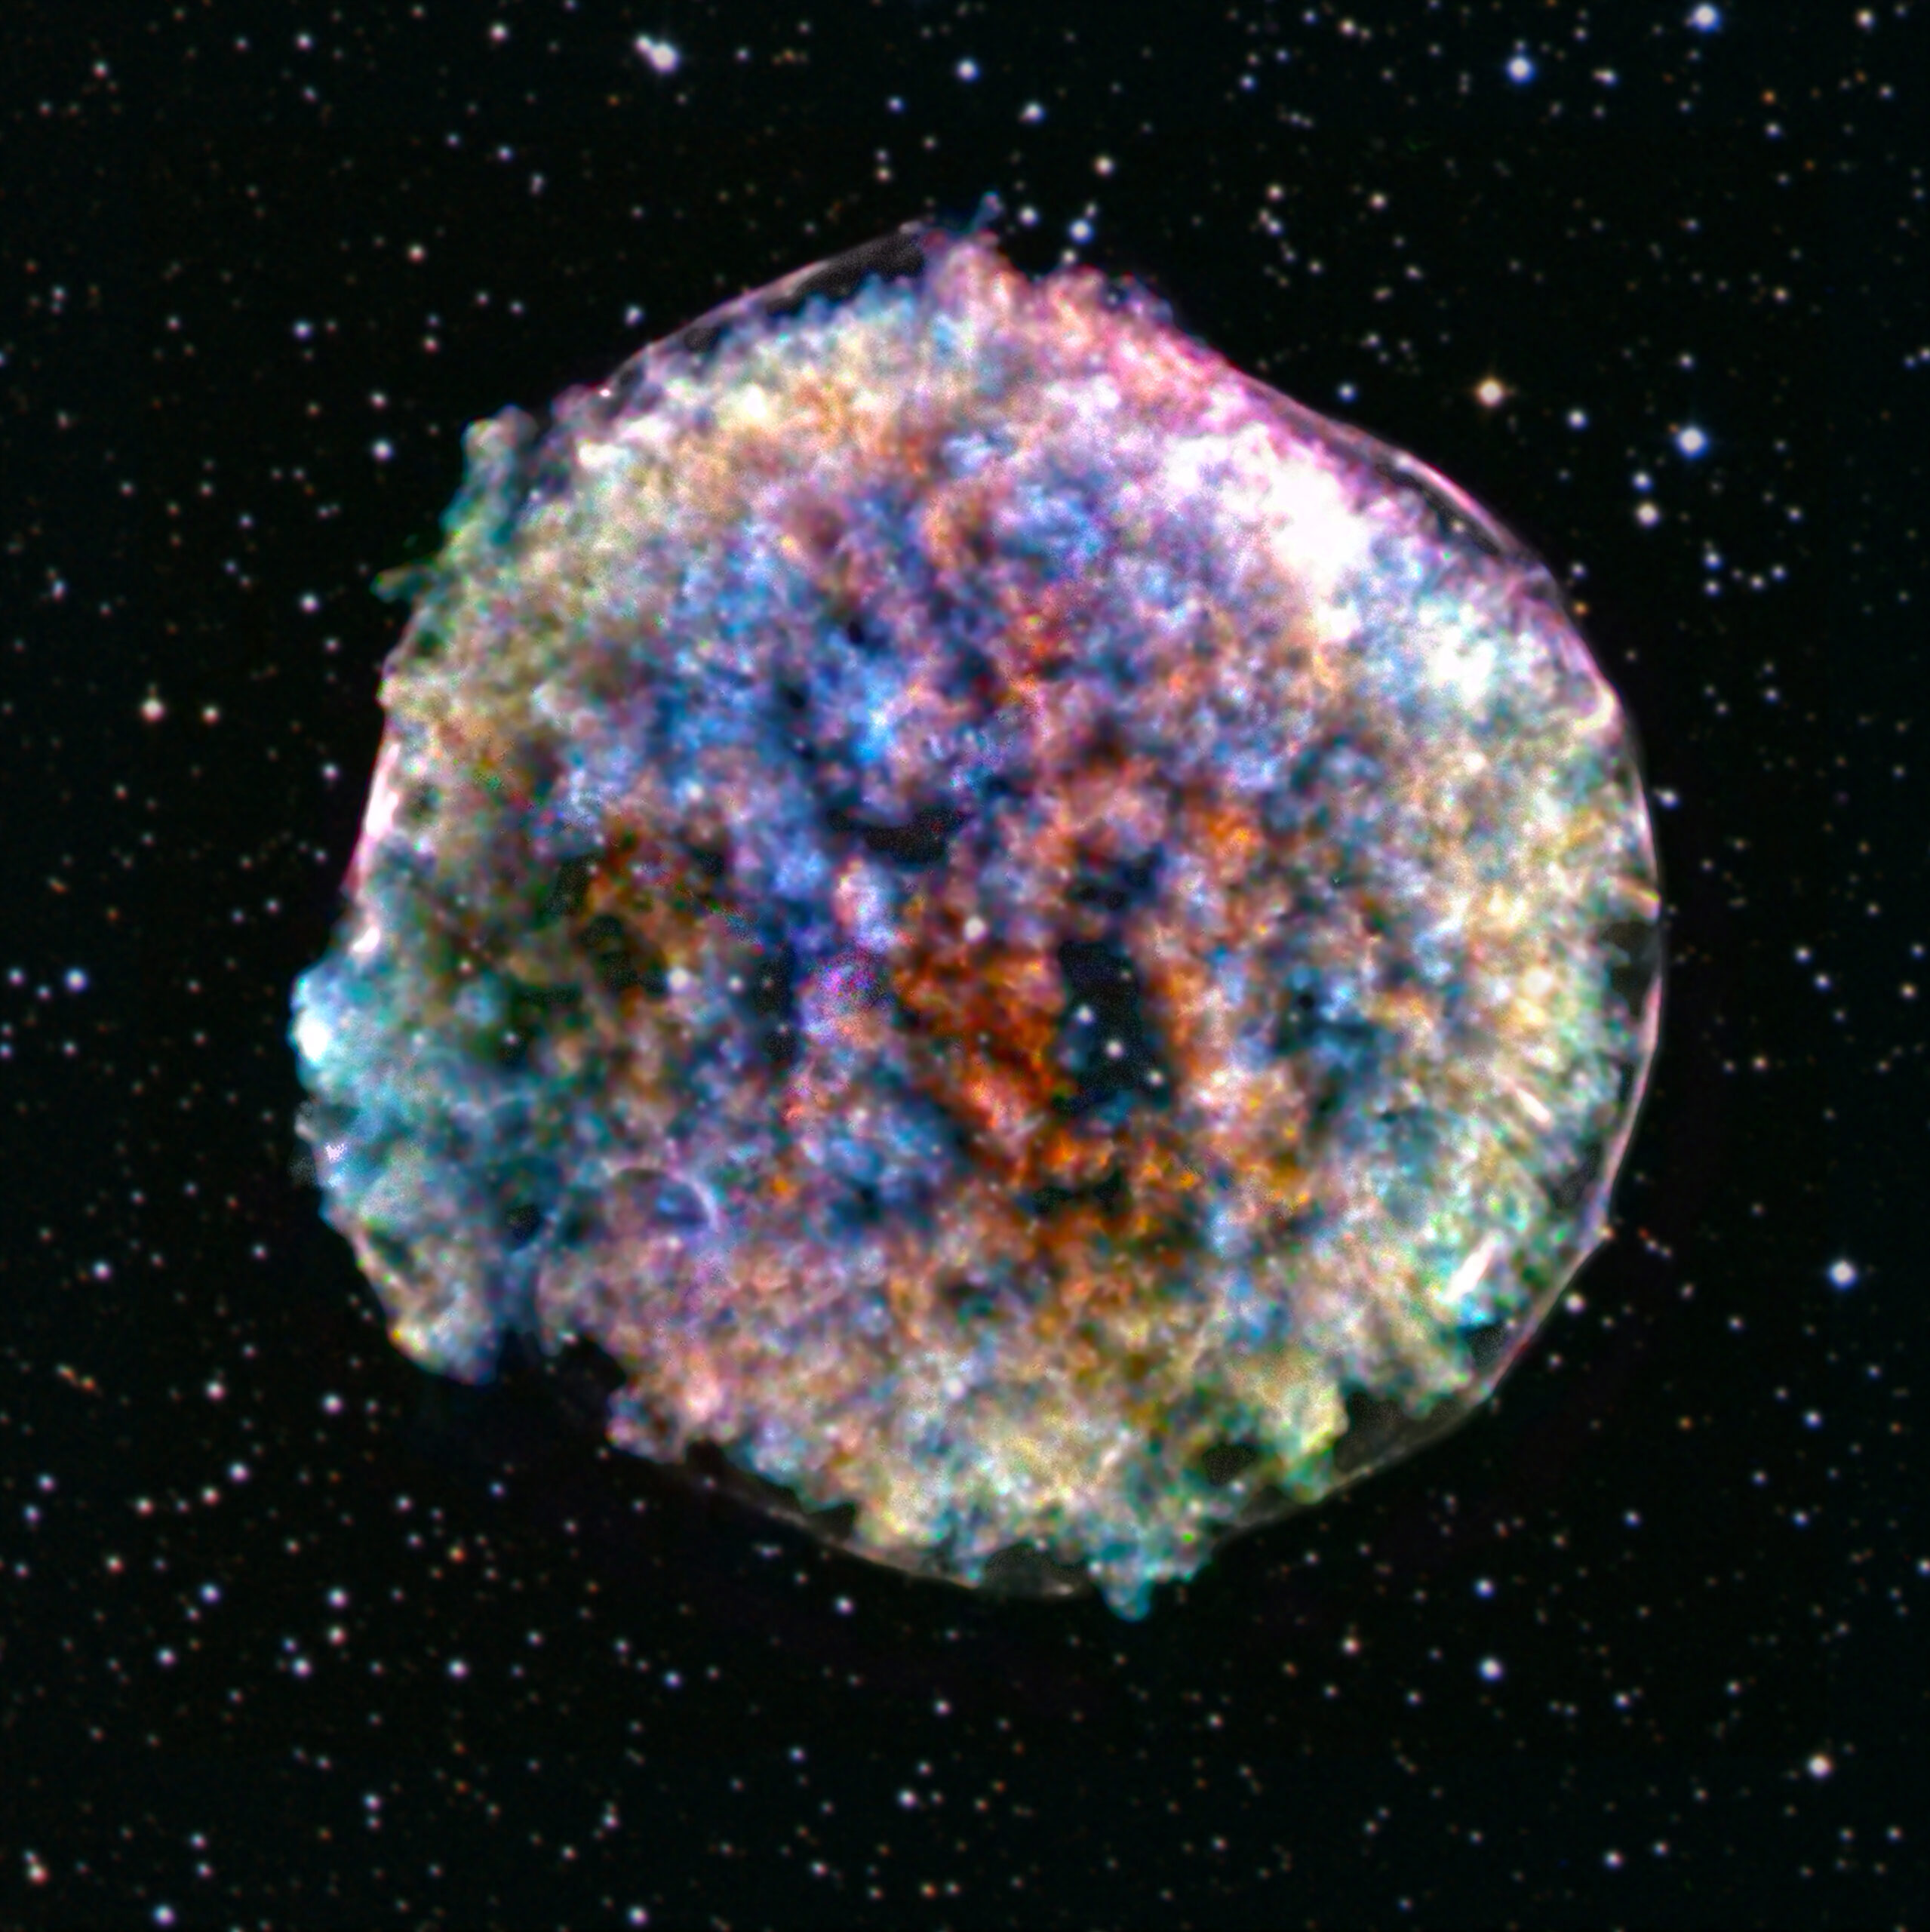 An X-ray and optical composite image of a detonating star.